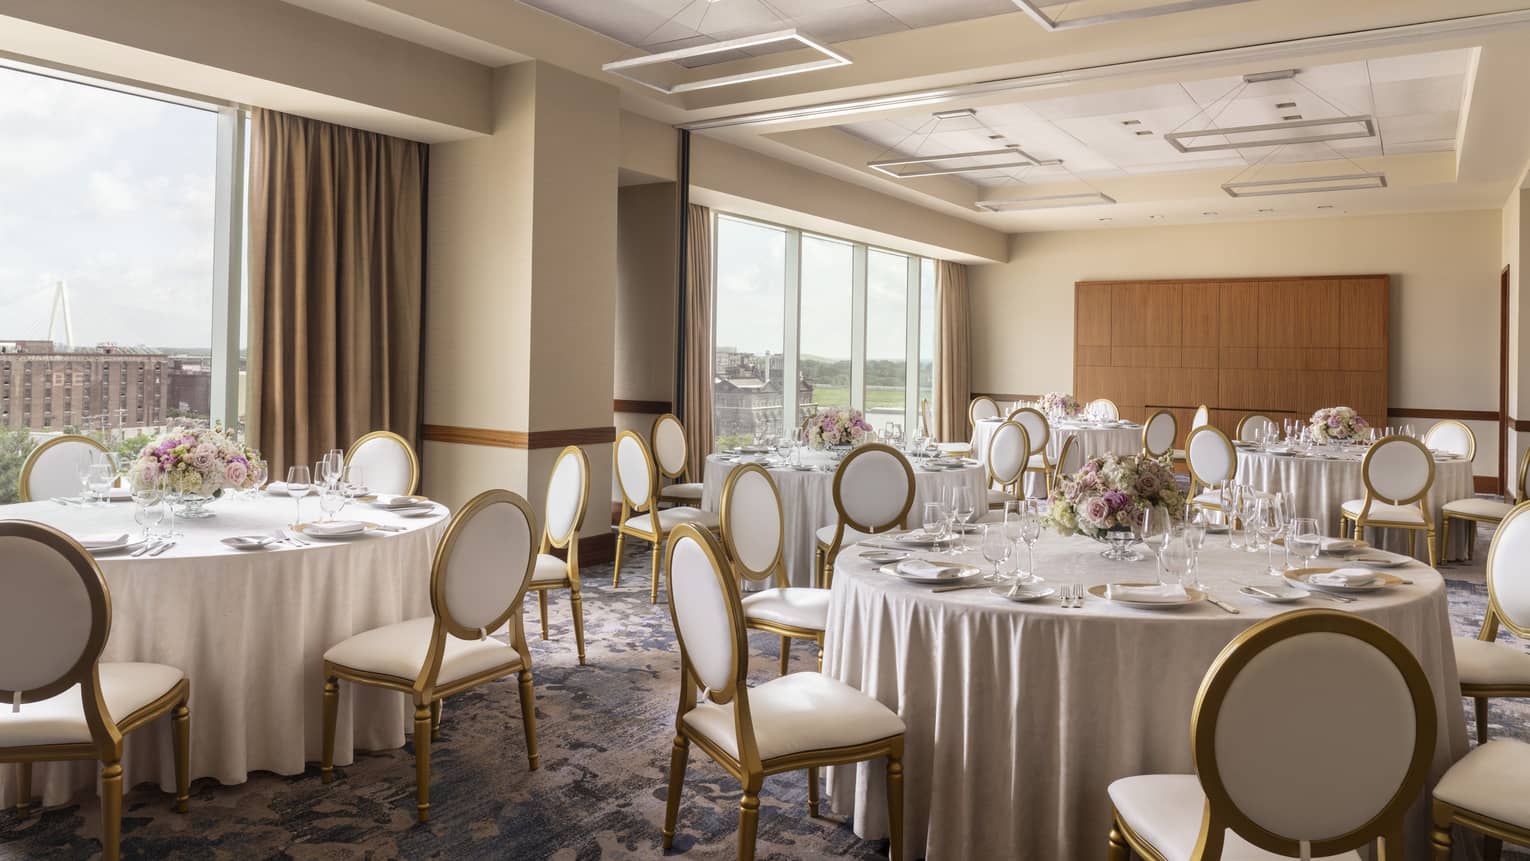 A room with round tables with table cloths, chairs, flower table settings, and large windows.